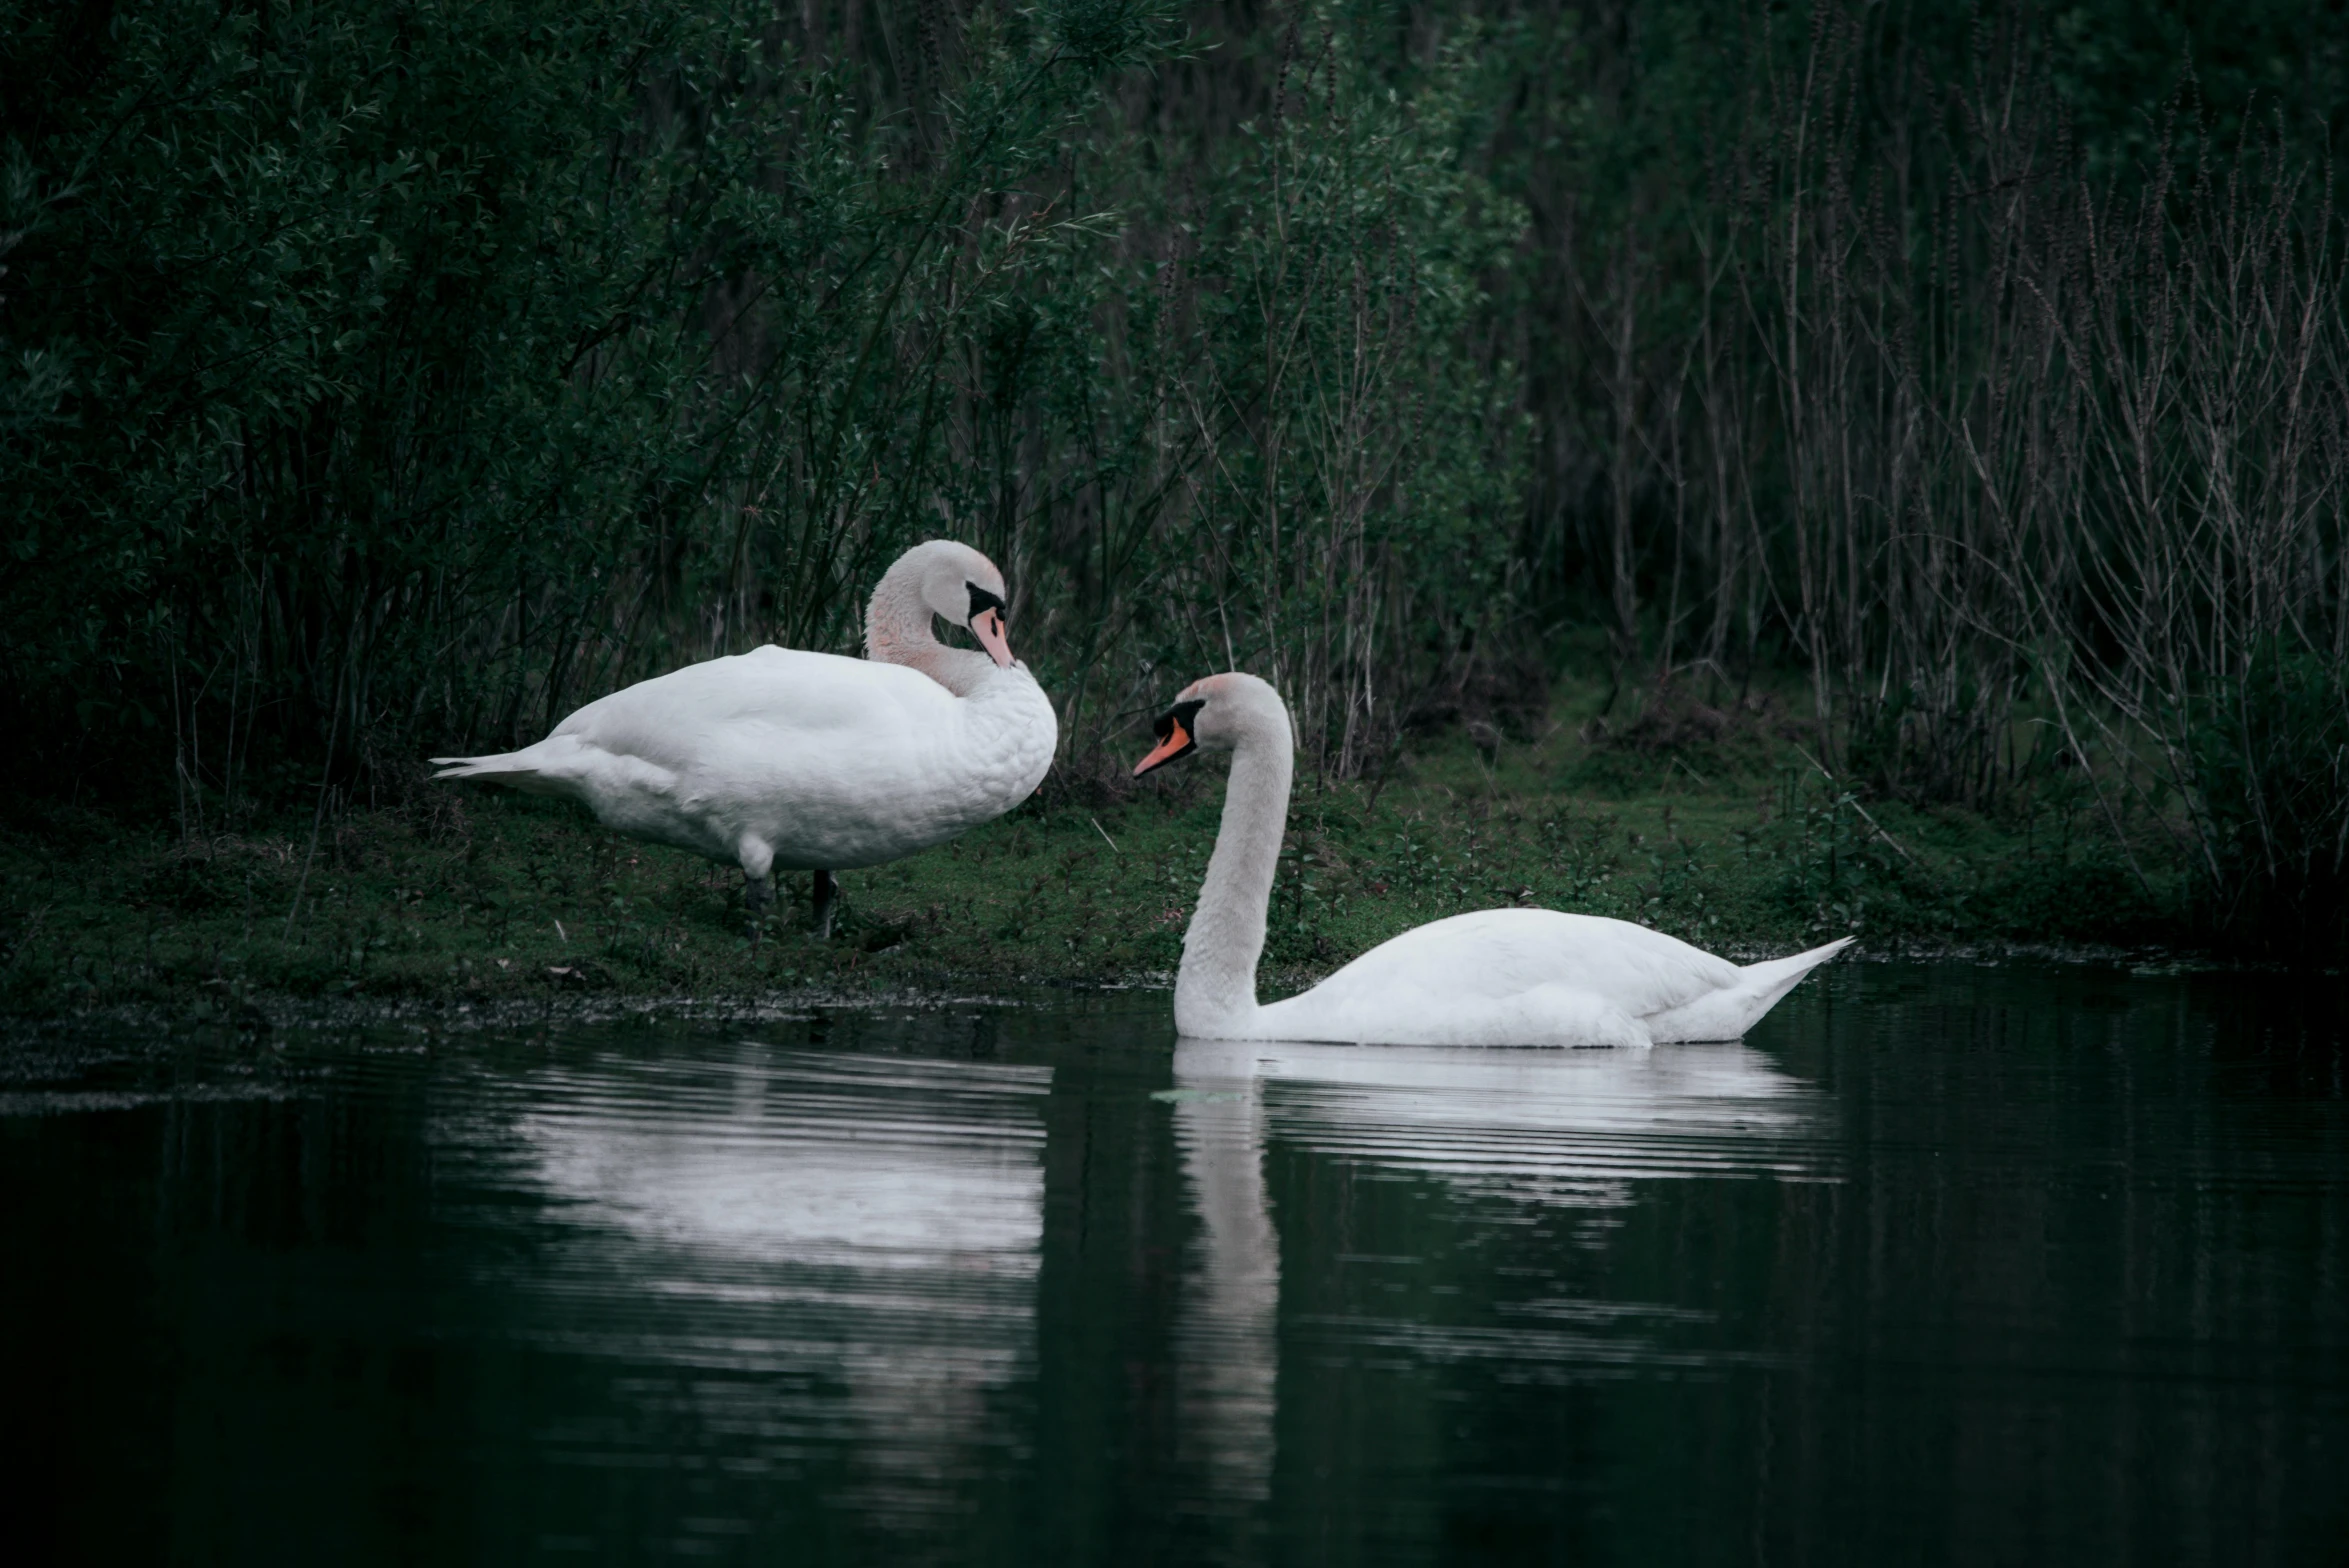 two swans are swimming on the water together